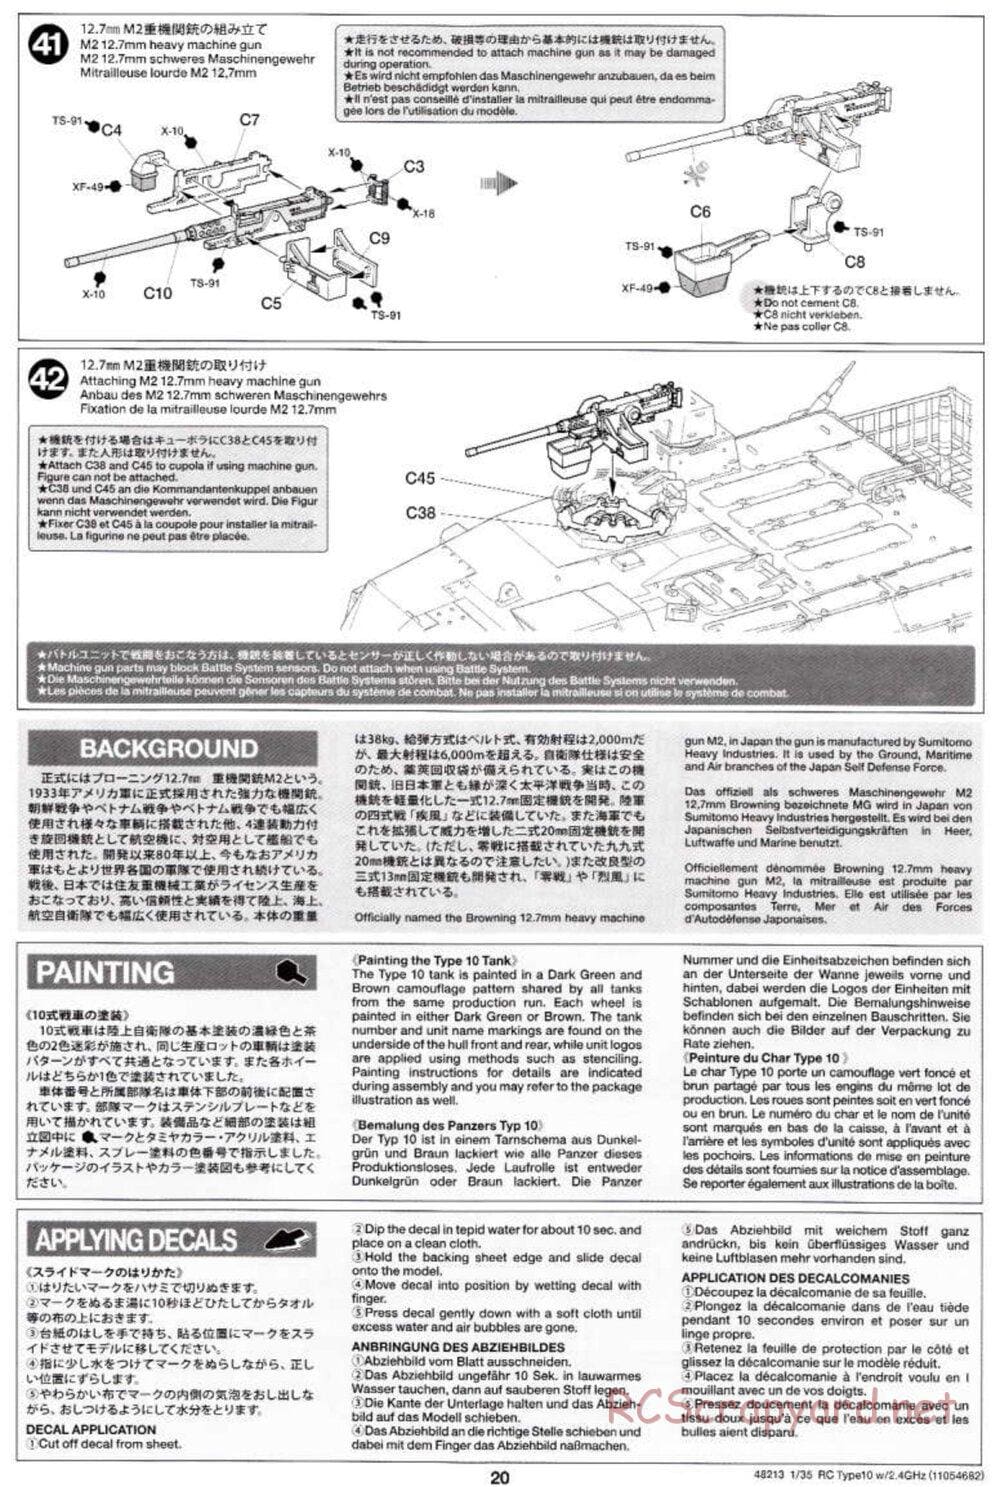 Tamiya - JGSDF Type 10 Tank - 1/35 Scale Chassis - Manual - Page 20